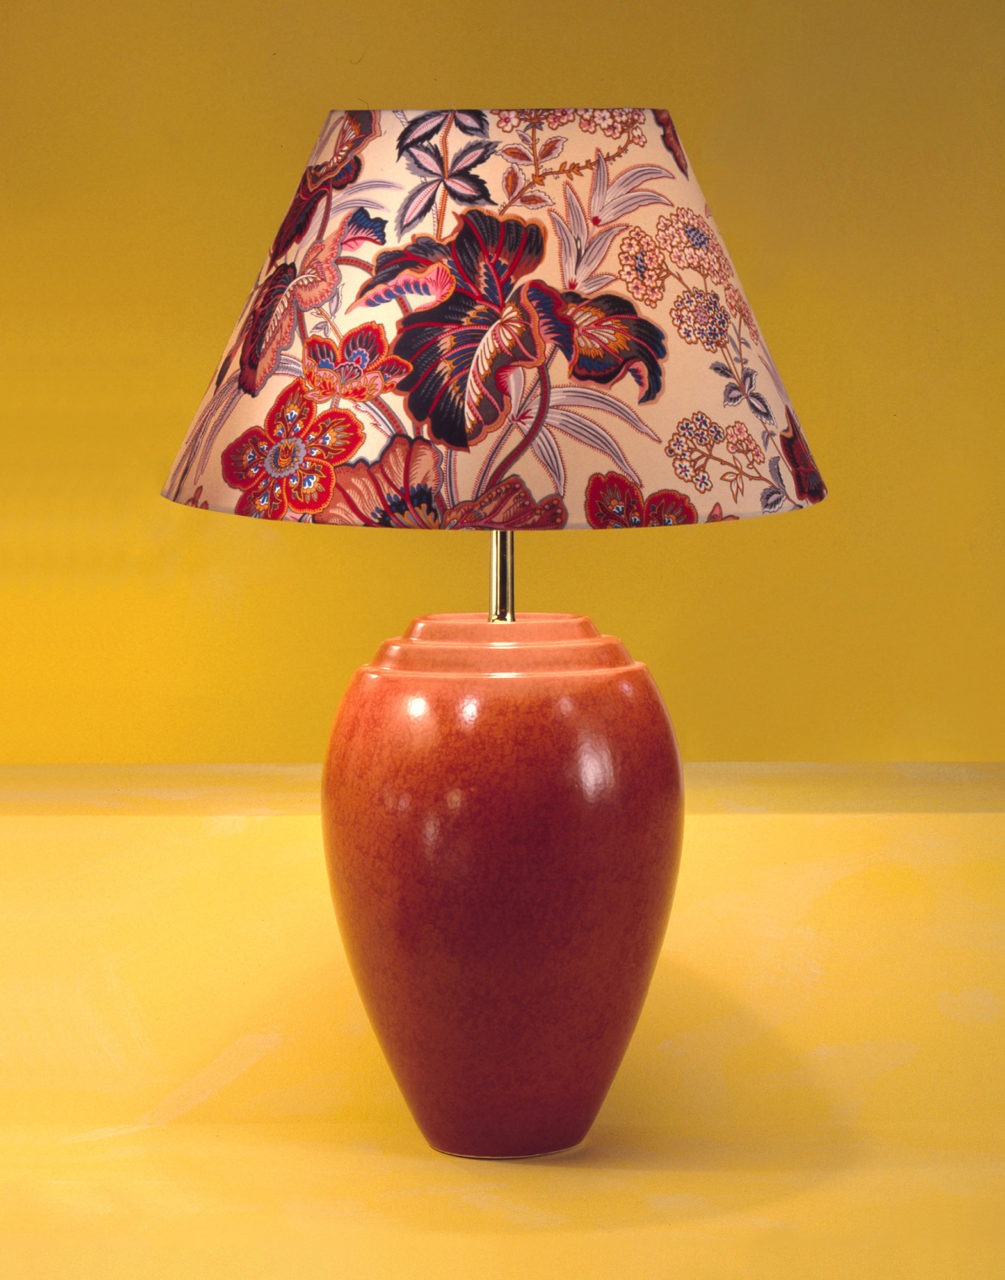 Table lamp with base in brown ceramic and lampshade in floral pattern in blue and red.